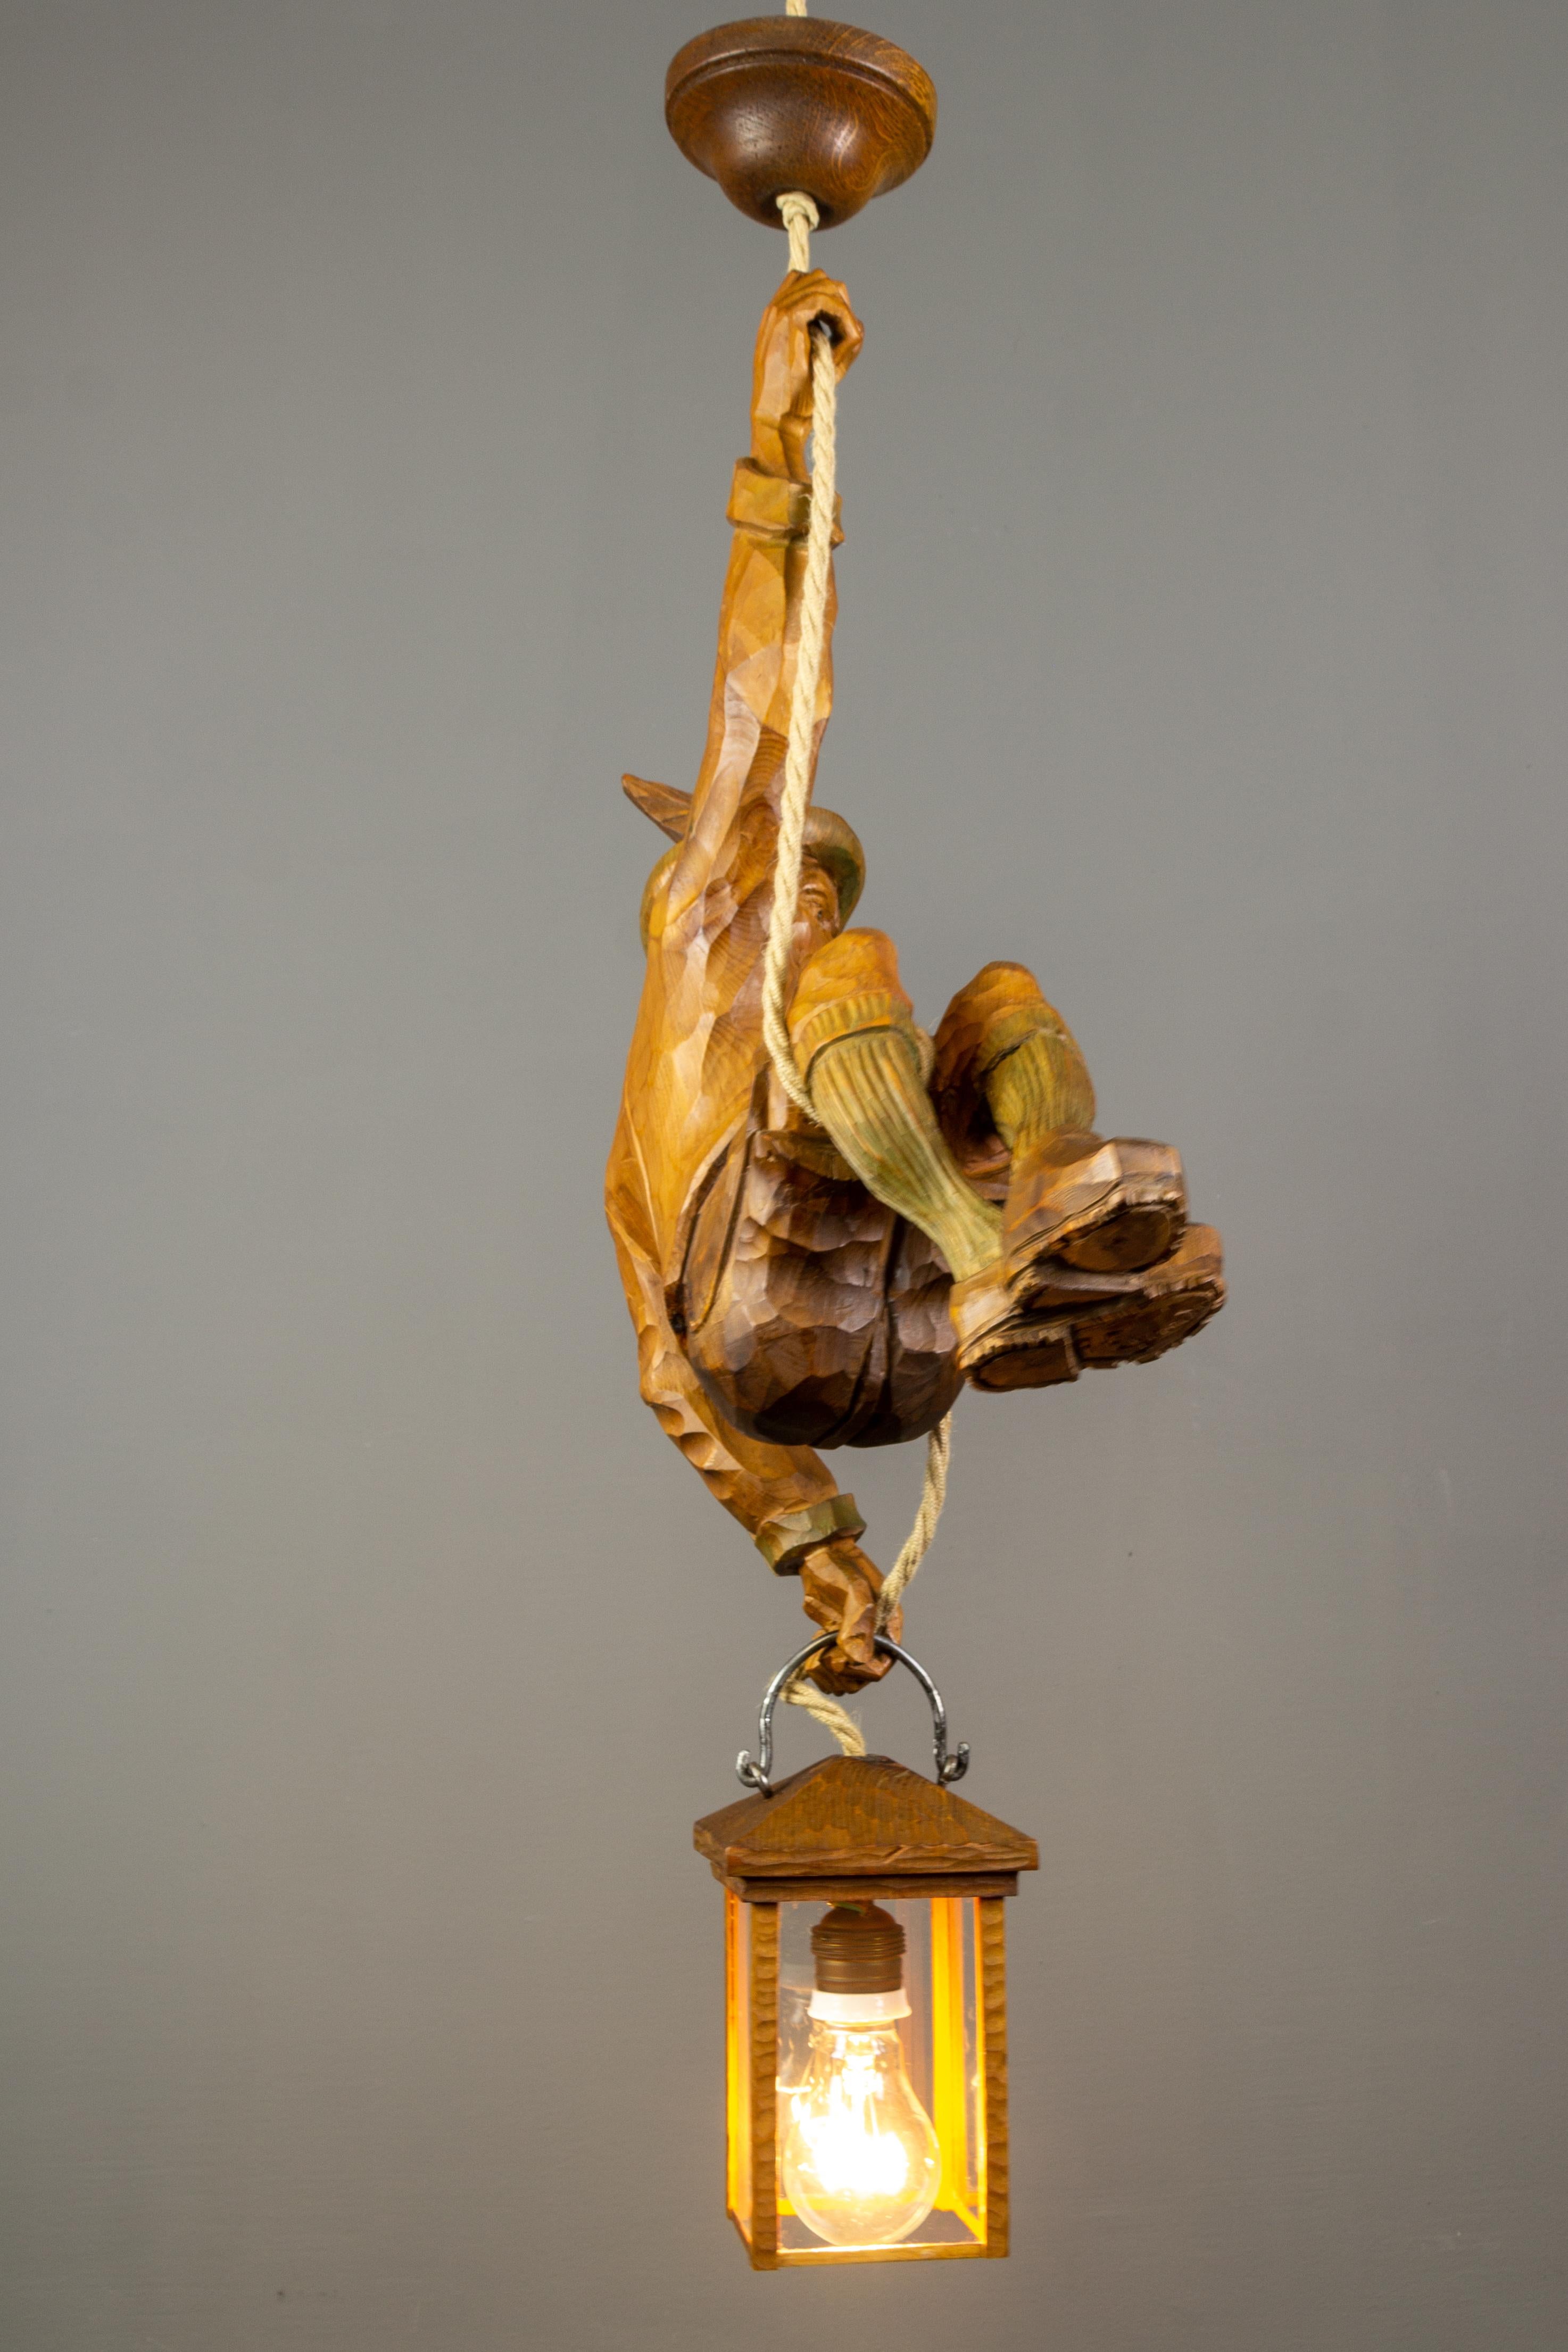 Mid-20th Century Pendant Light with a Large Wooden Figure Mountain Climber with Lantern, Germany For Sale